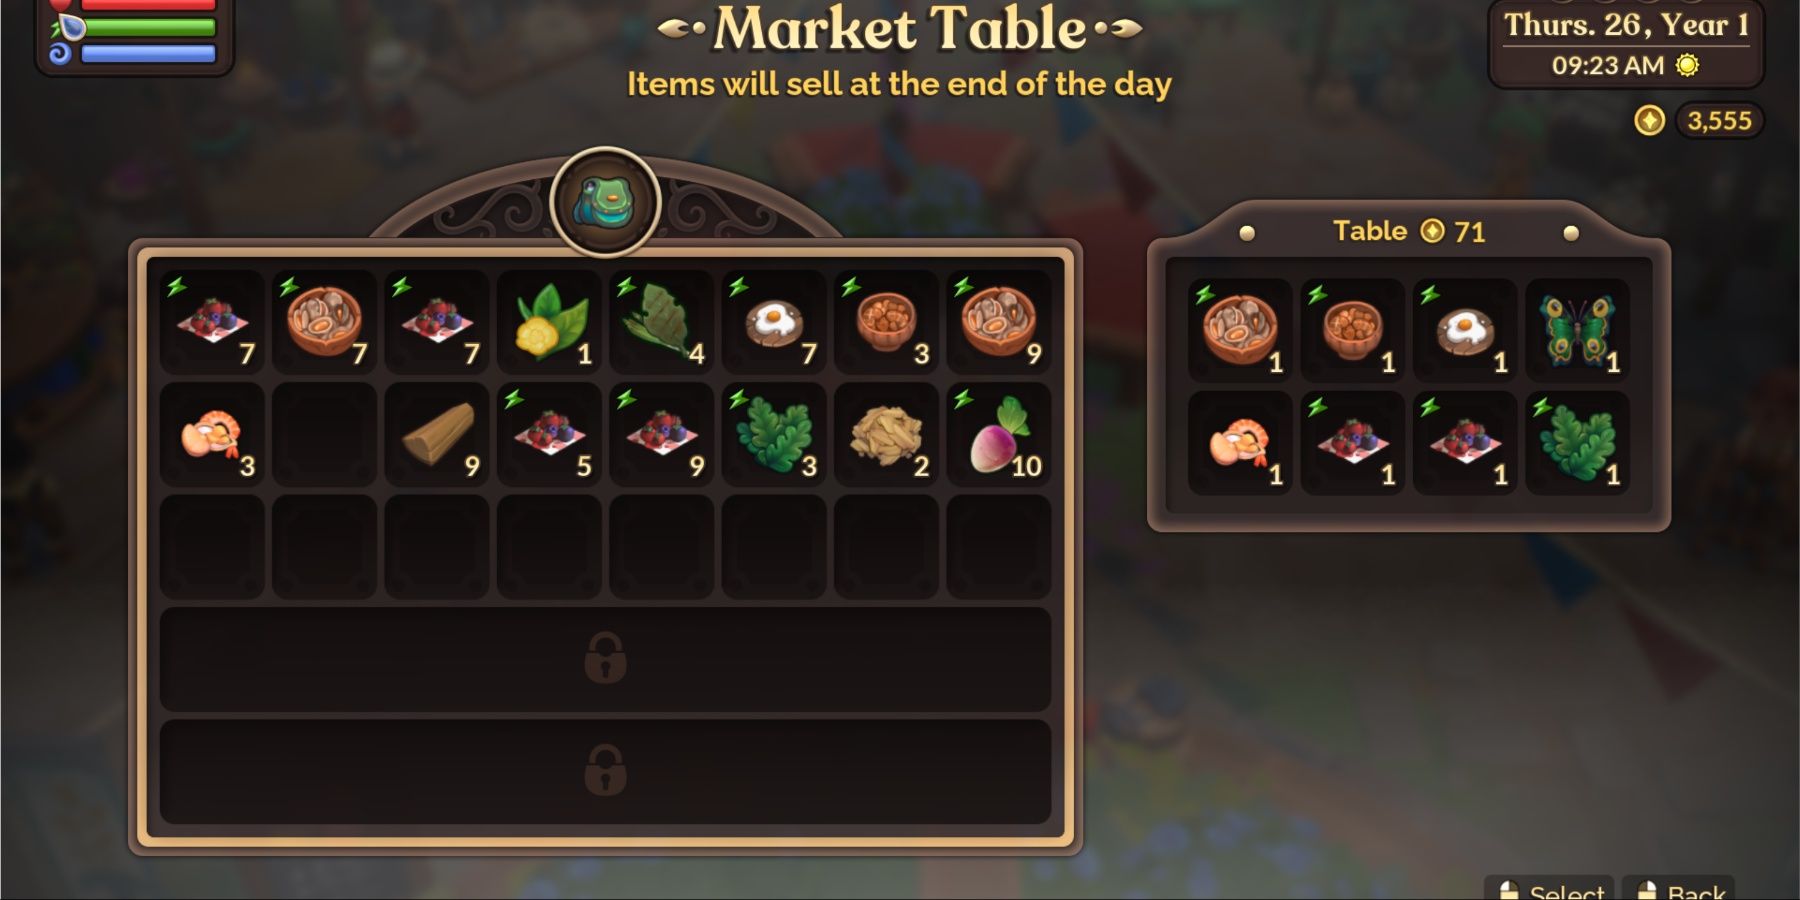 Fae Farm market table UI interface showing the value of a table's items